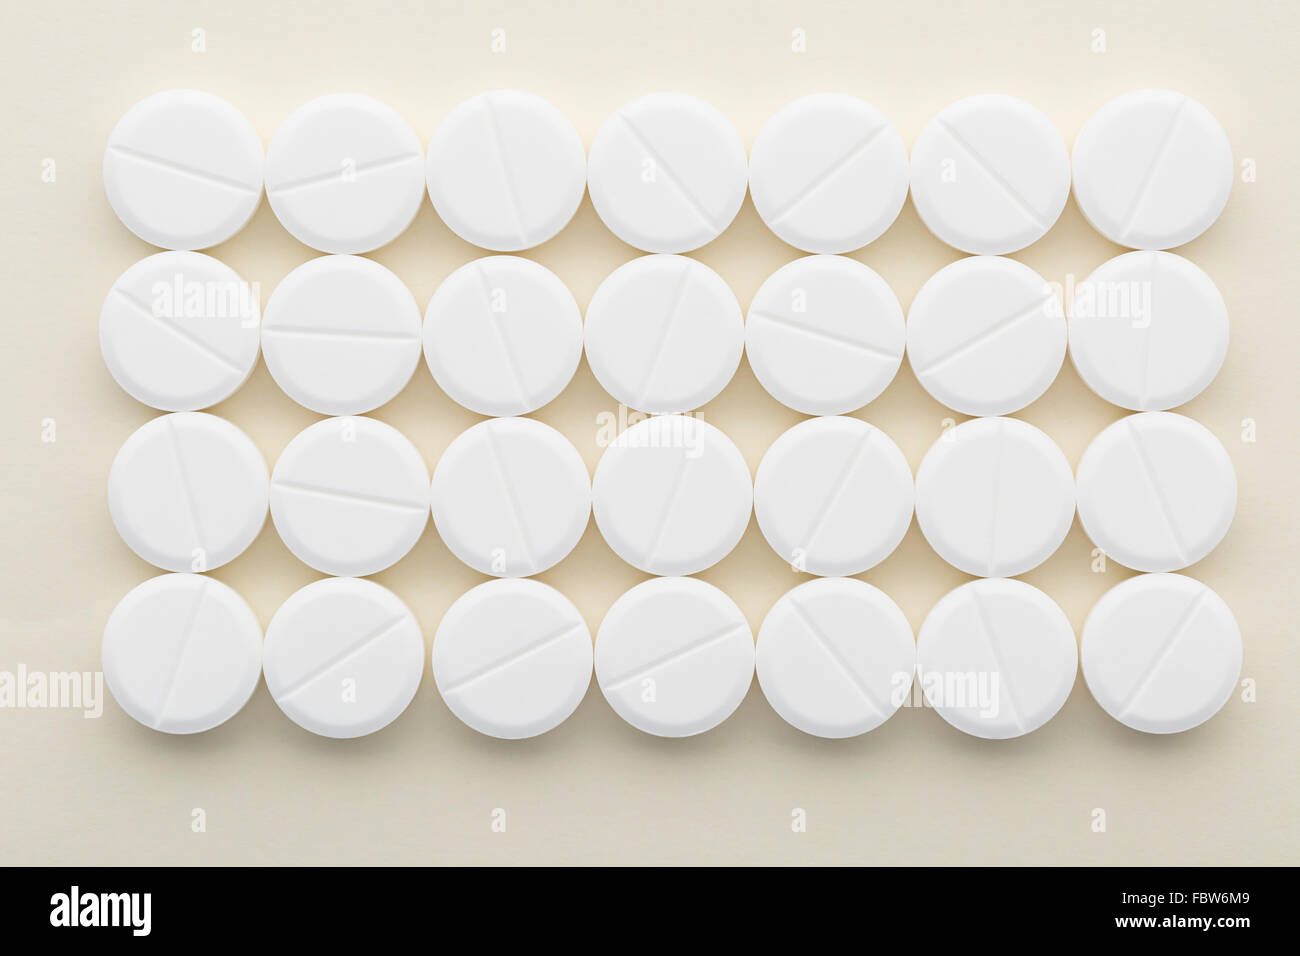 Rectangle of white pills on a light background Stock Photo